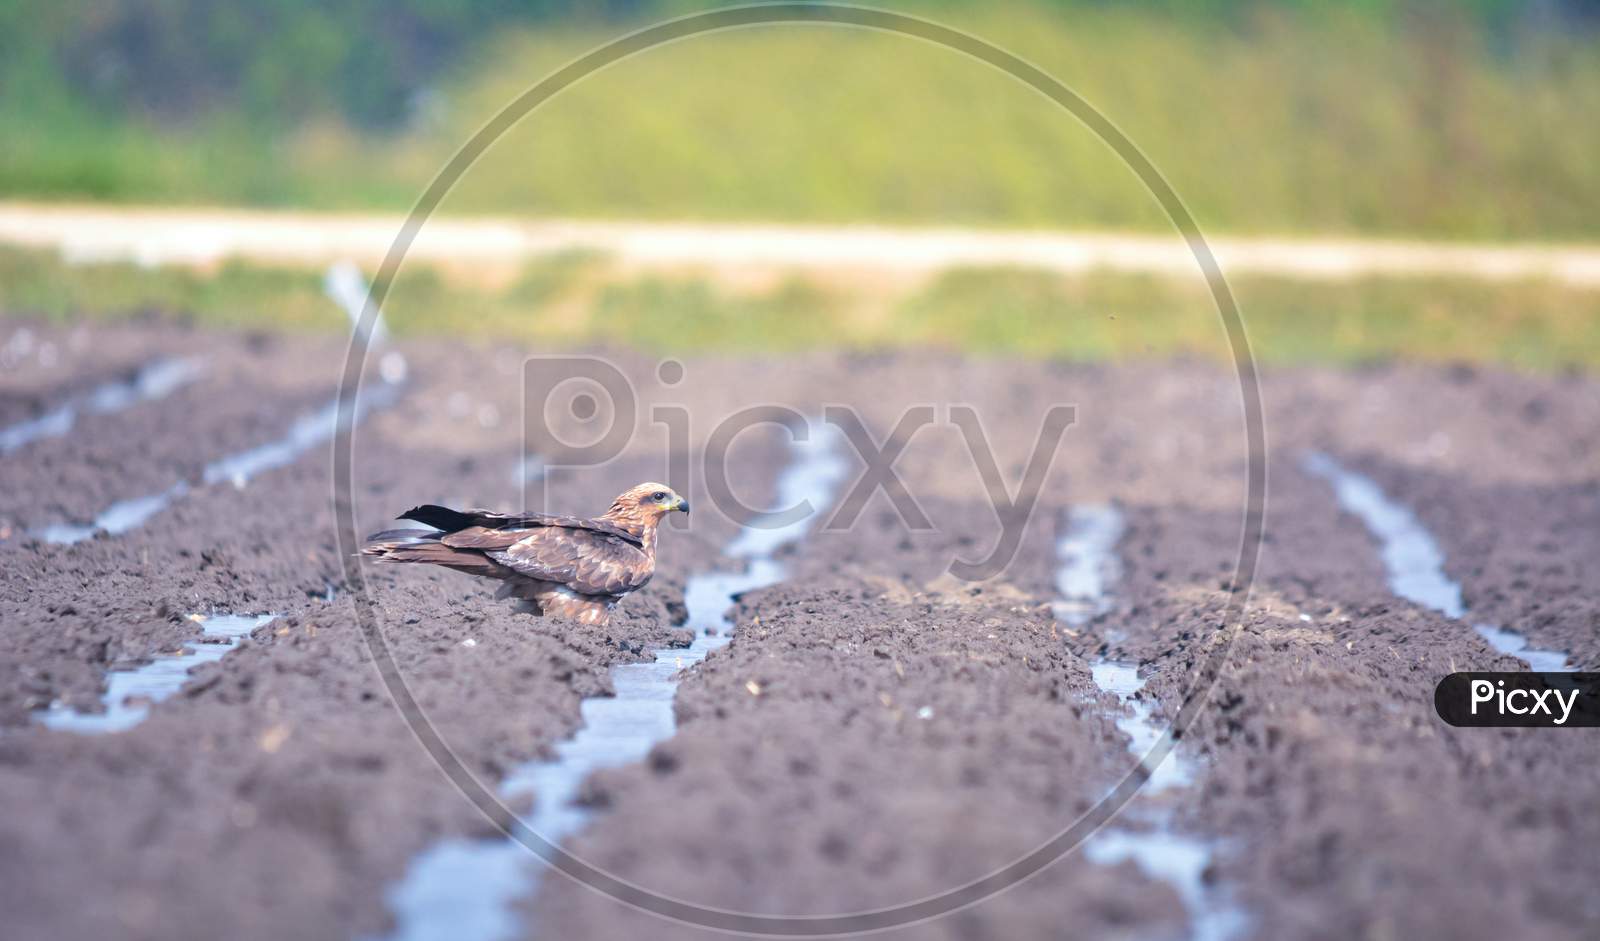 The Black Kite Is A Medium-Sized Bird Of Prey About To Drink Water